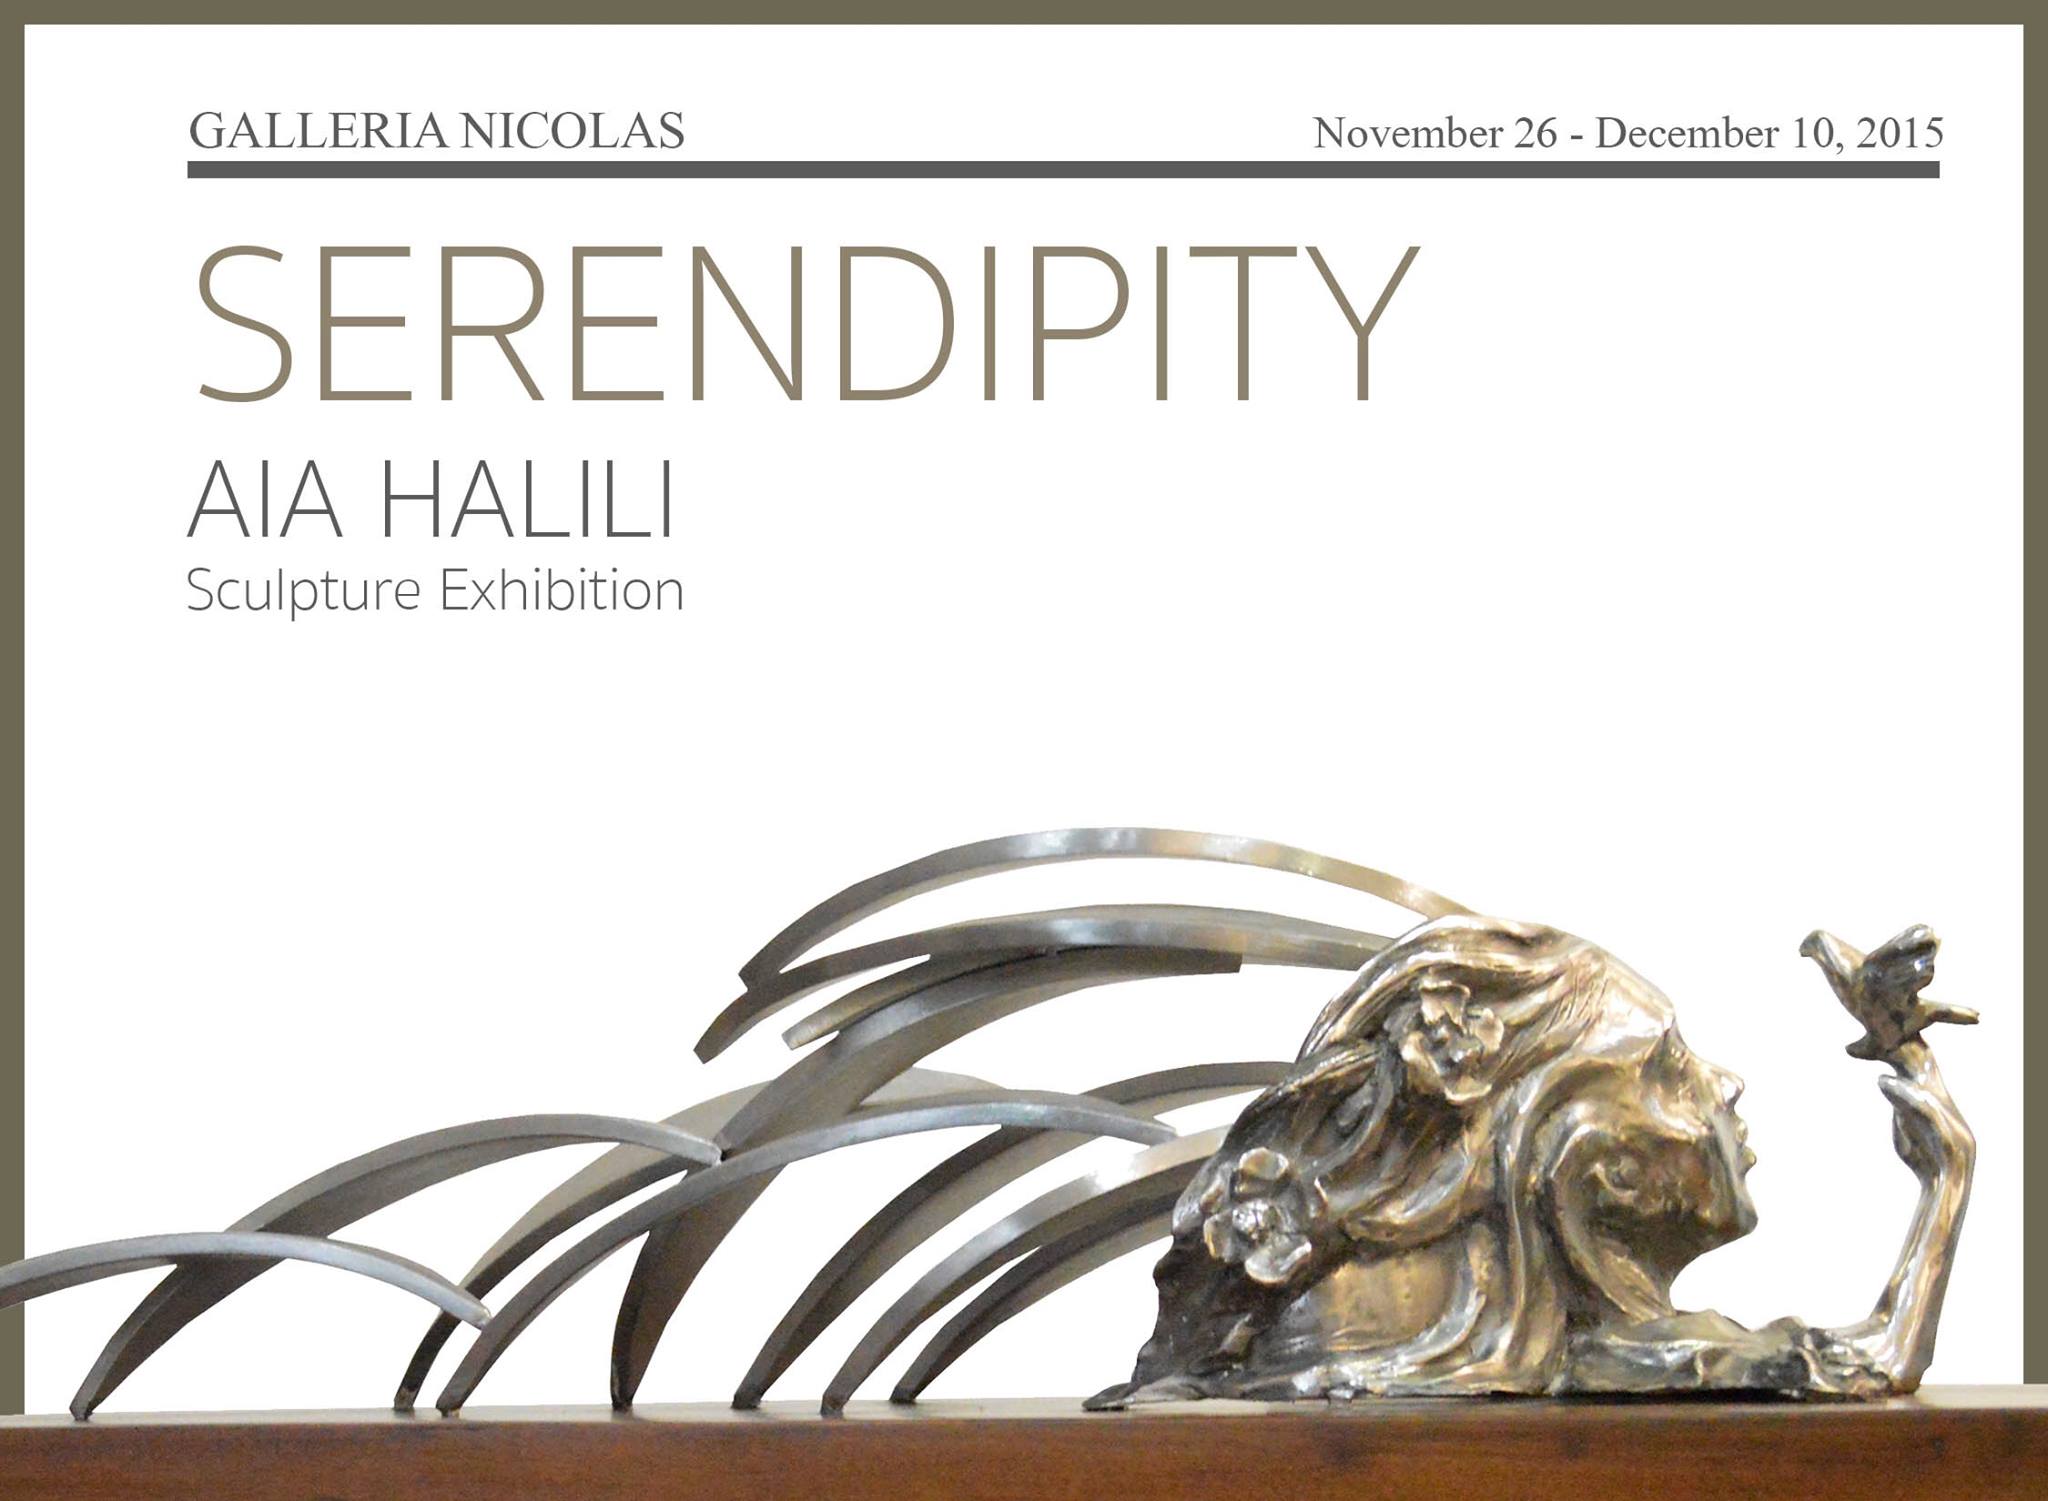 SERENDIPITY | A Solo Exhibition by Aia Halili clock Thursday, November 26 at 6:00pm 3 days from now · 91°F / 75°F Clear pin Show Map Galleria Nicolas Third Floor, Art Space, Glorietta 4, Makati City, 1200 Manila, Philippines envelope Invited by Galerie Raphael You are cordially invited as Aia Halili reflects on the values she places in Filipino traditions, family, and home in her latest one-man sculpture exhibition titled Serendipity, which opens on Thursday, November 26 at 6 p.m., Galleria Nicolas, 3/F, Art Space, Glorietta 4, Ayala Center, Makati City. For more information, please call (632) 625-0273, or email info@gallerianicolas.com. The exhibition will run until 7 Dec. 2015.